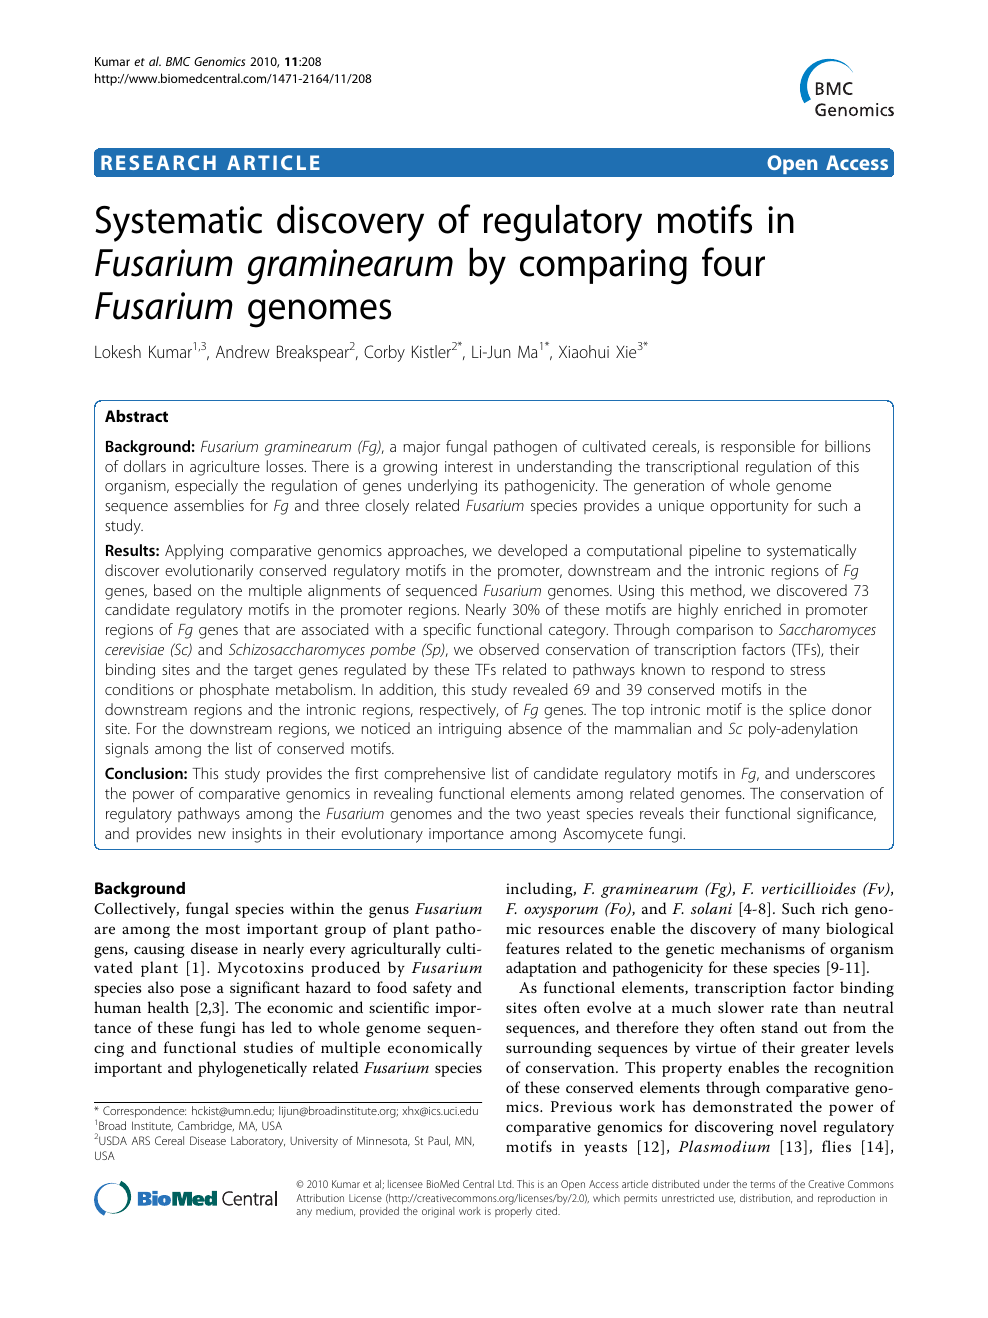 Systematic Discovery Of Regulatory Motifs In Fusarium Graminearum By Comparing Four Fusarium Genomes Topic Of Research Paper In Biological Sciences Download Scholarly Article Pdf And Read For Free On Cyberleninka Open